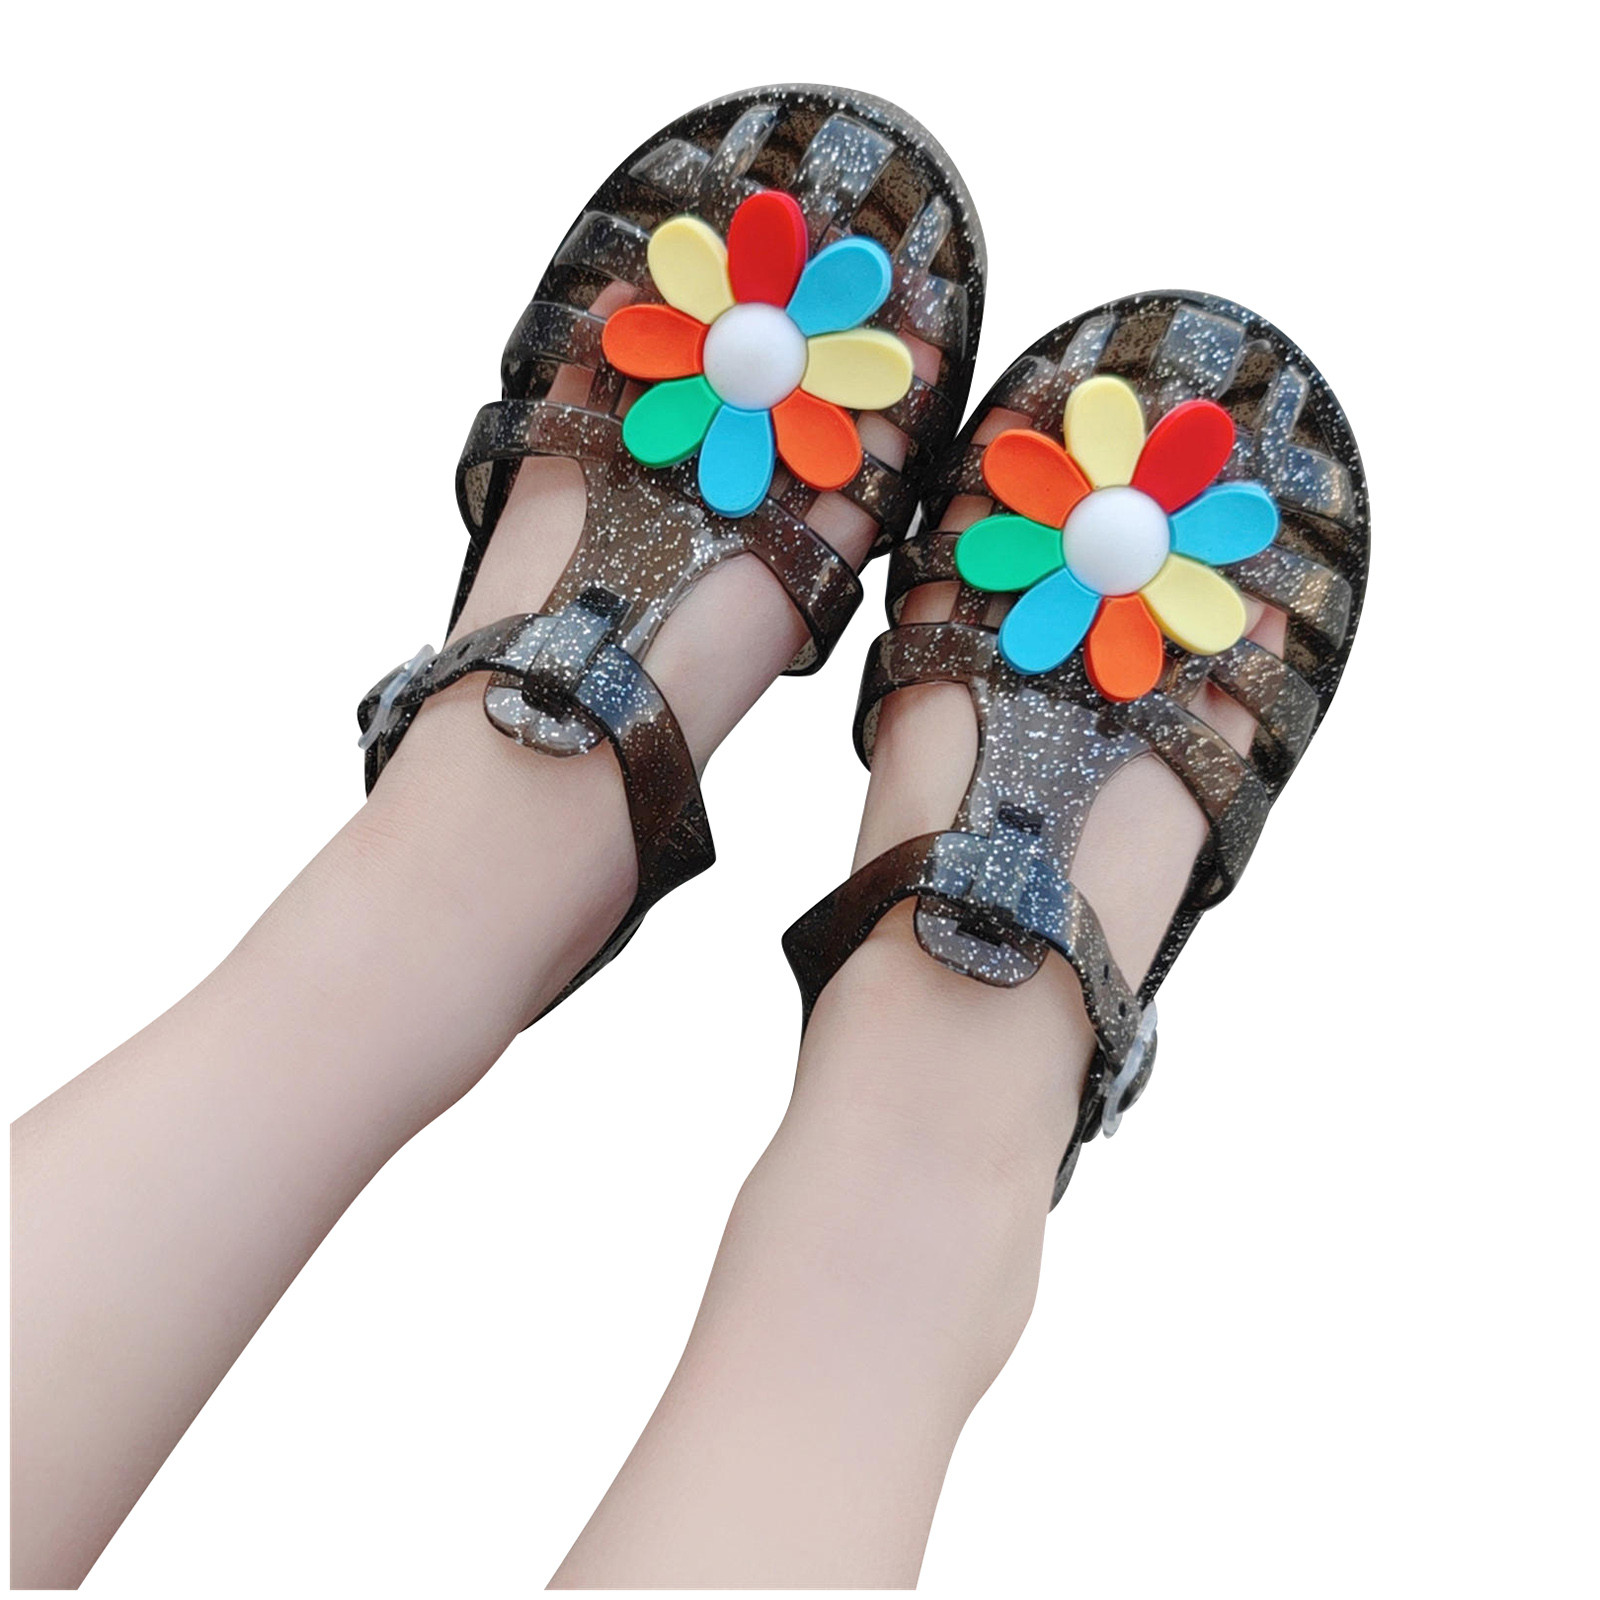 Virmaxy Toddler Baby Girls Jelly Sandals Closed Toe Flower Decorative ...